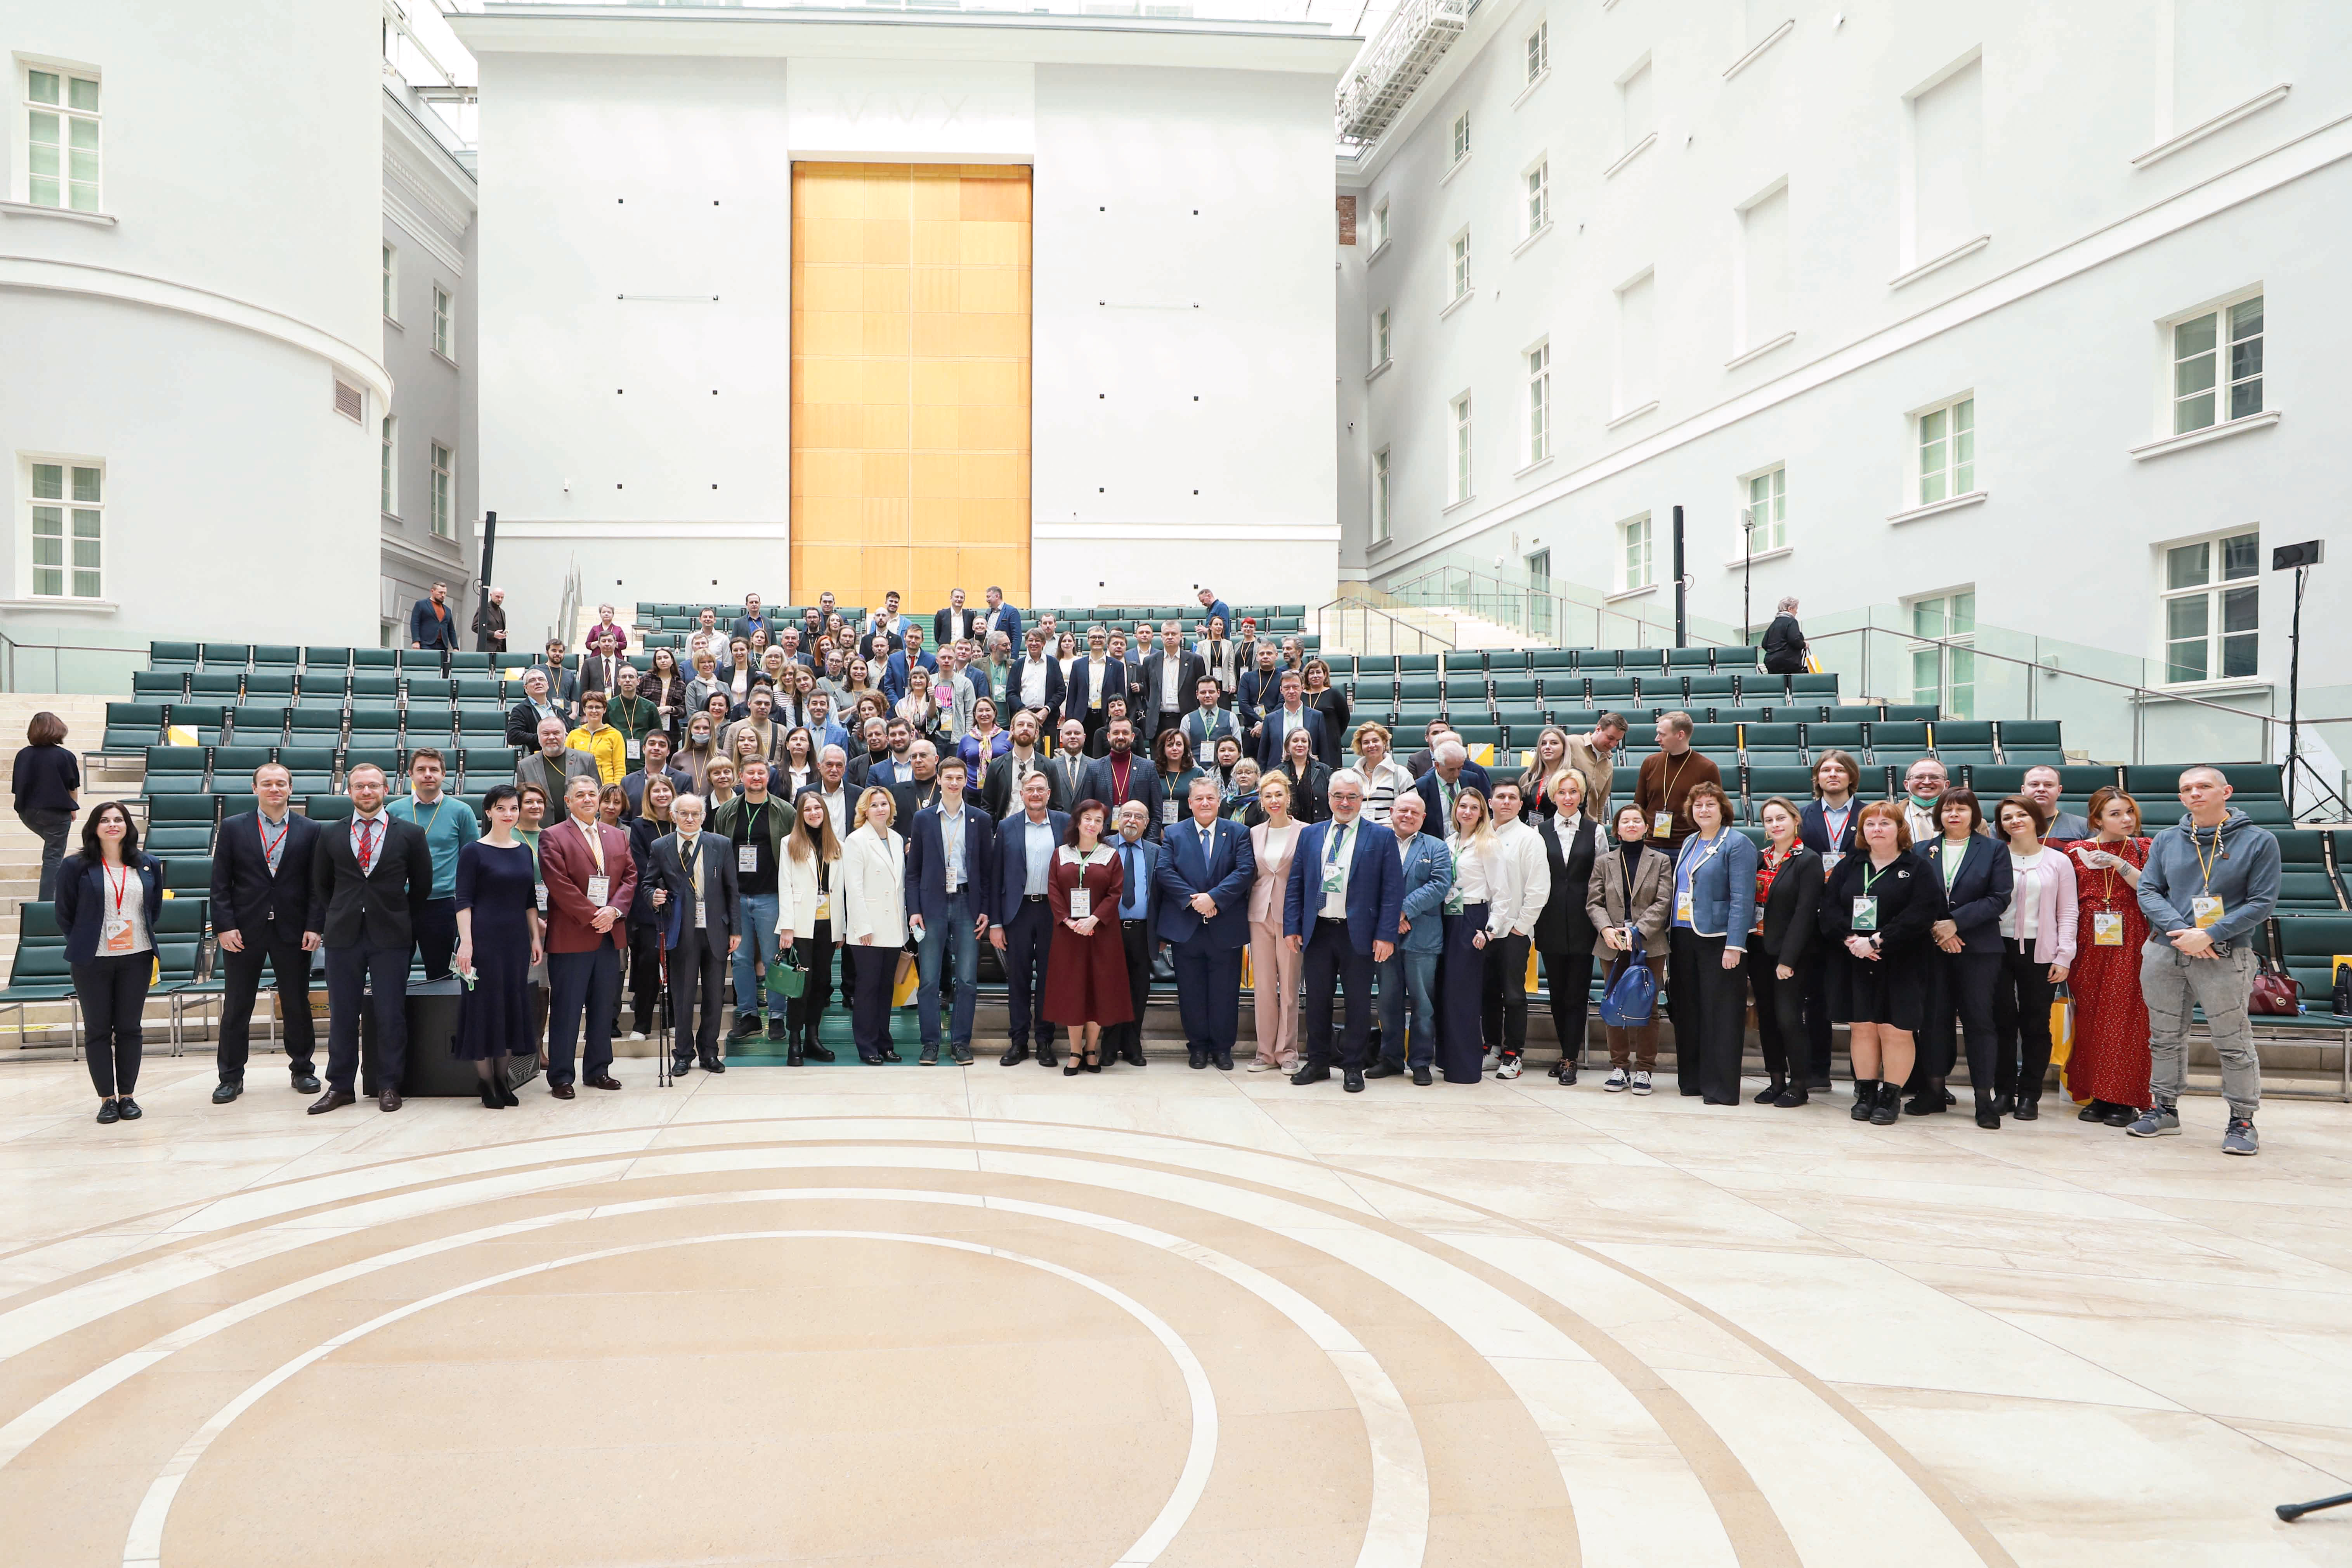 Results of the International Conference "Light in Museum”